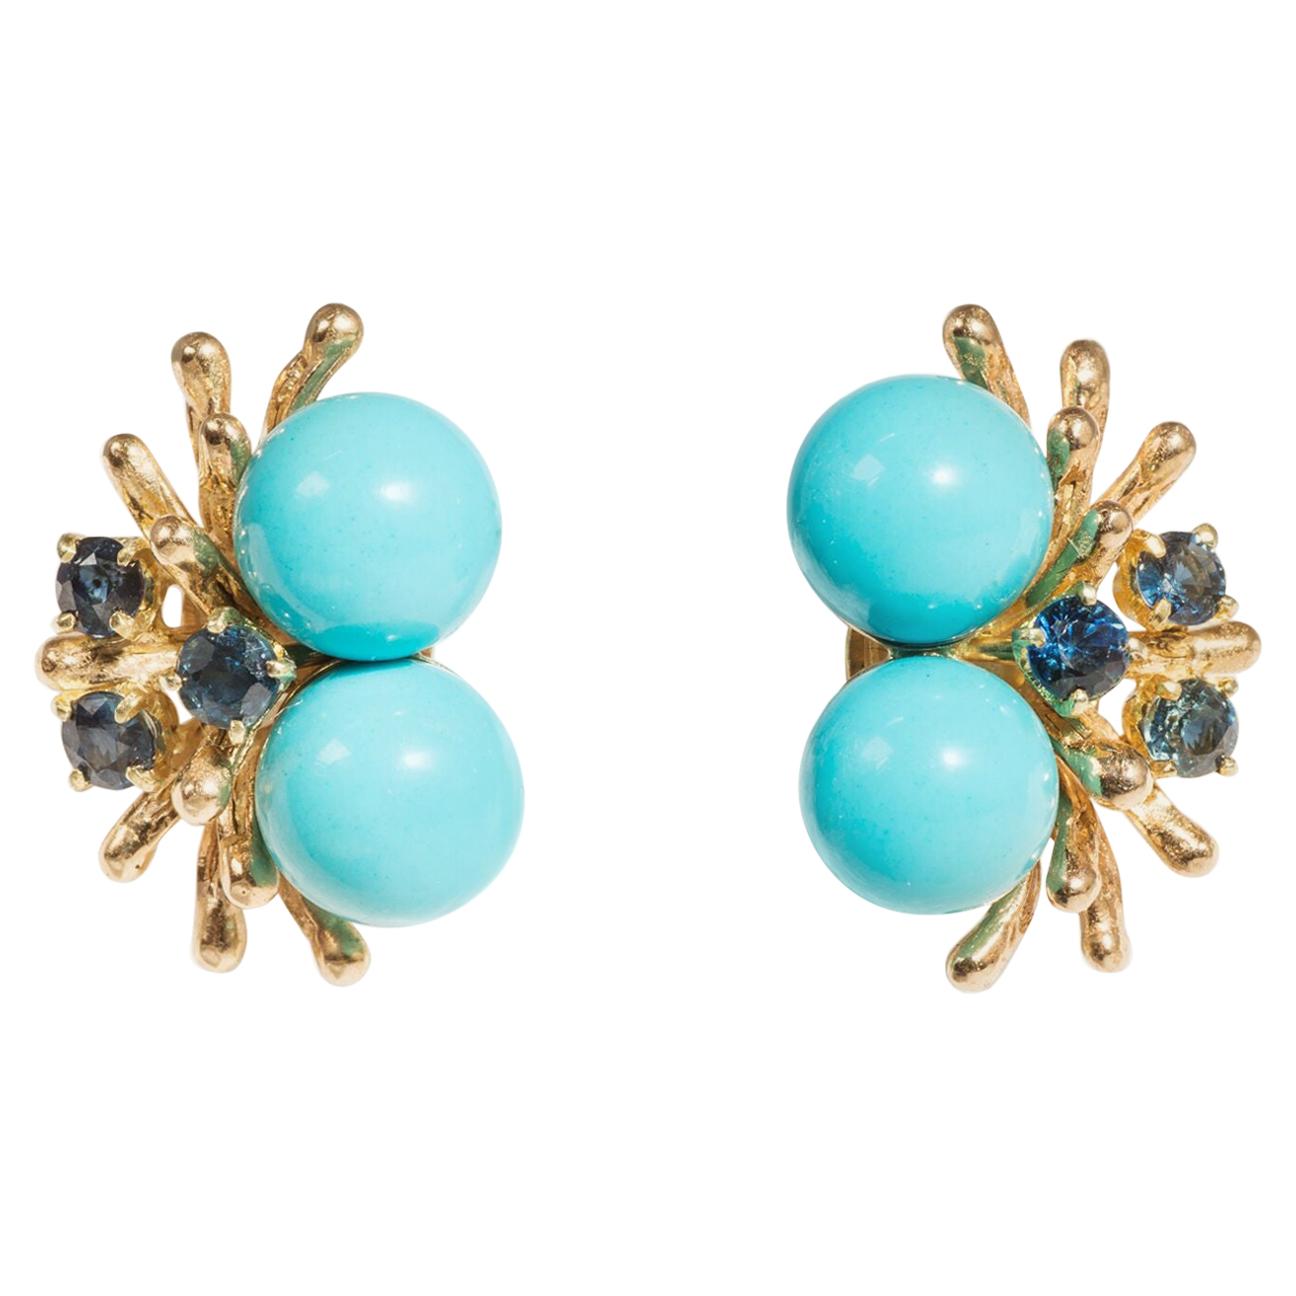 Turquoise and Sapphire Earrings, 14 Carat Yellow Gold